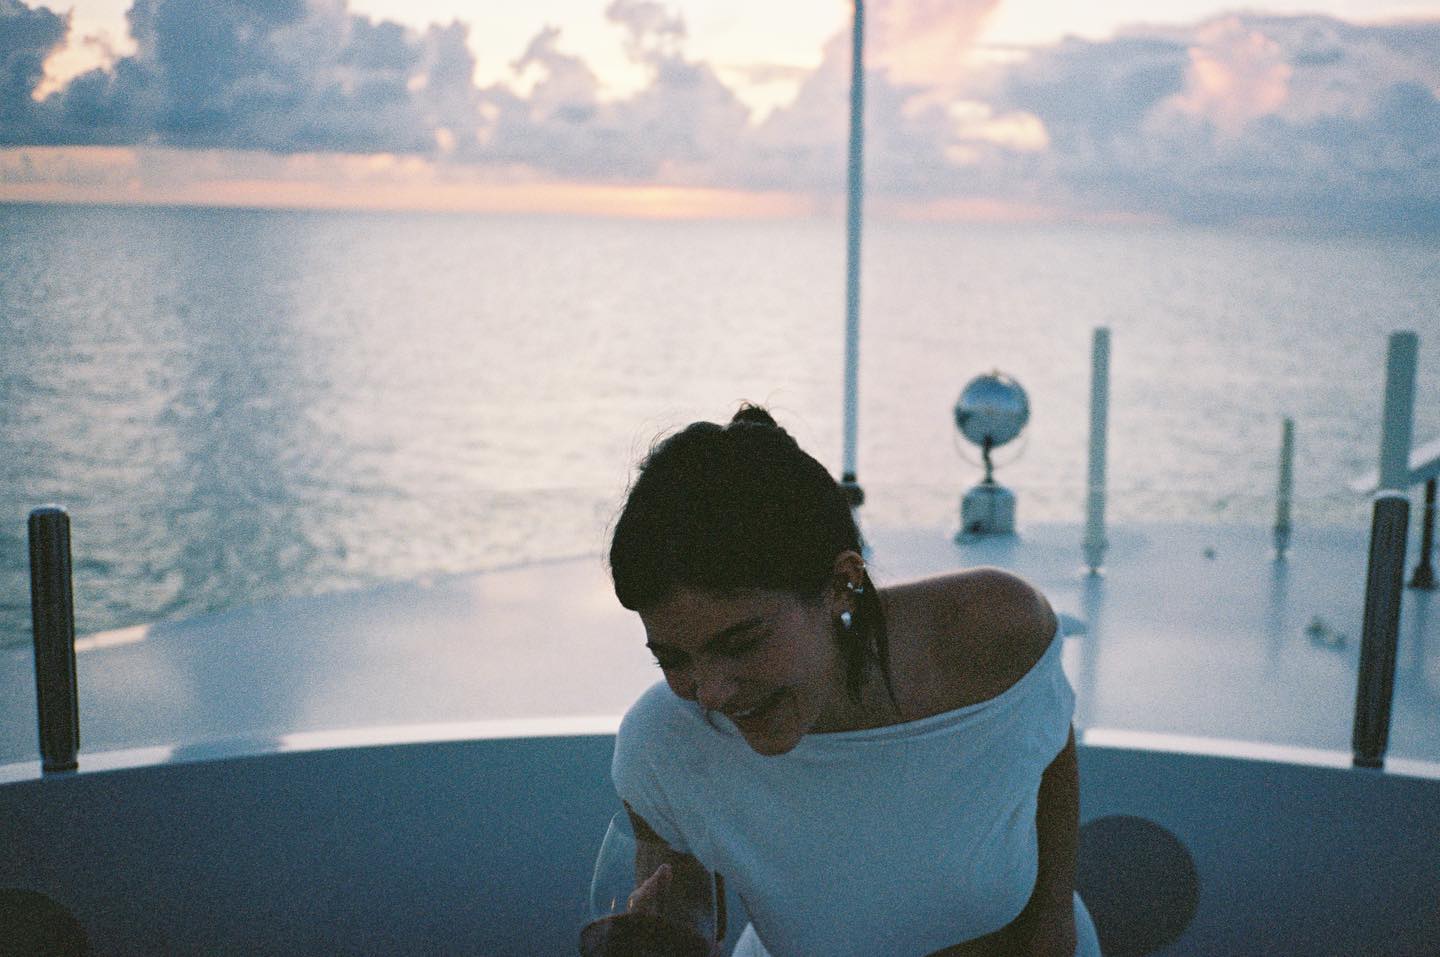 Kylie Jenner at vacation. (Photo: Instagram)